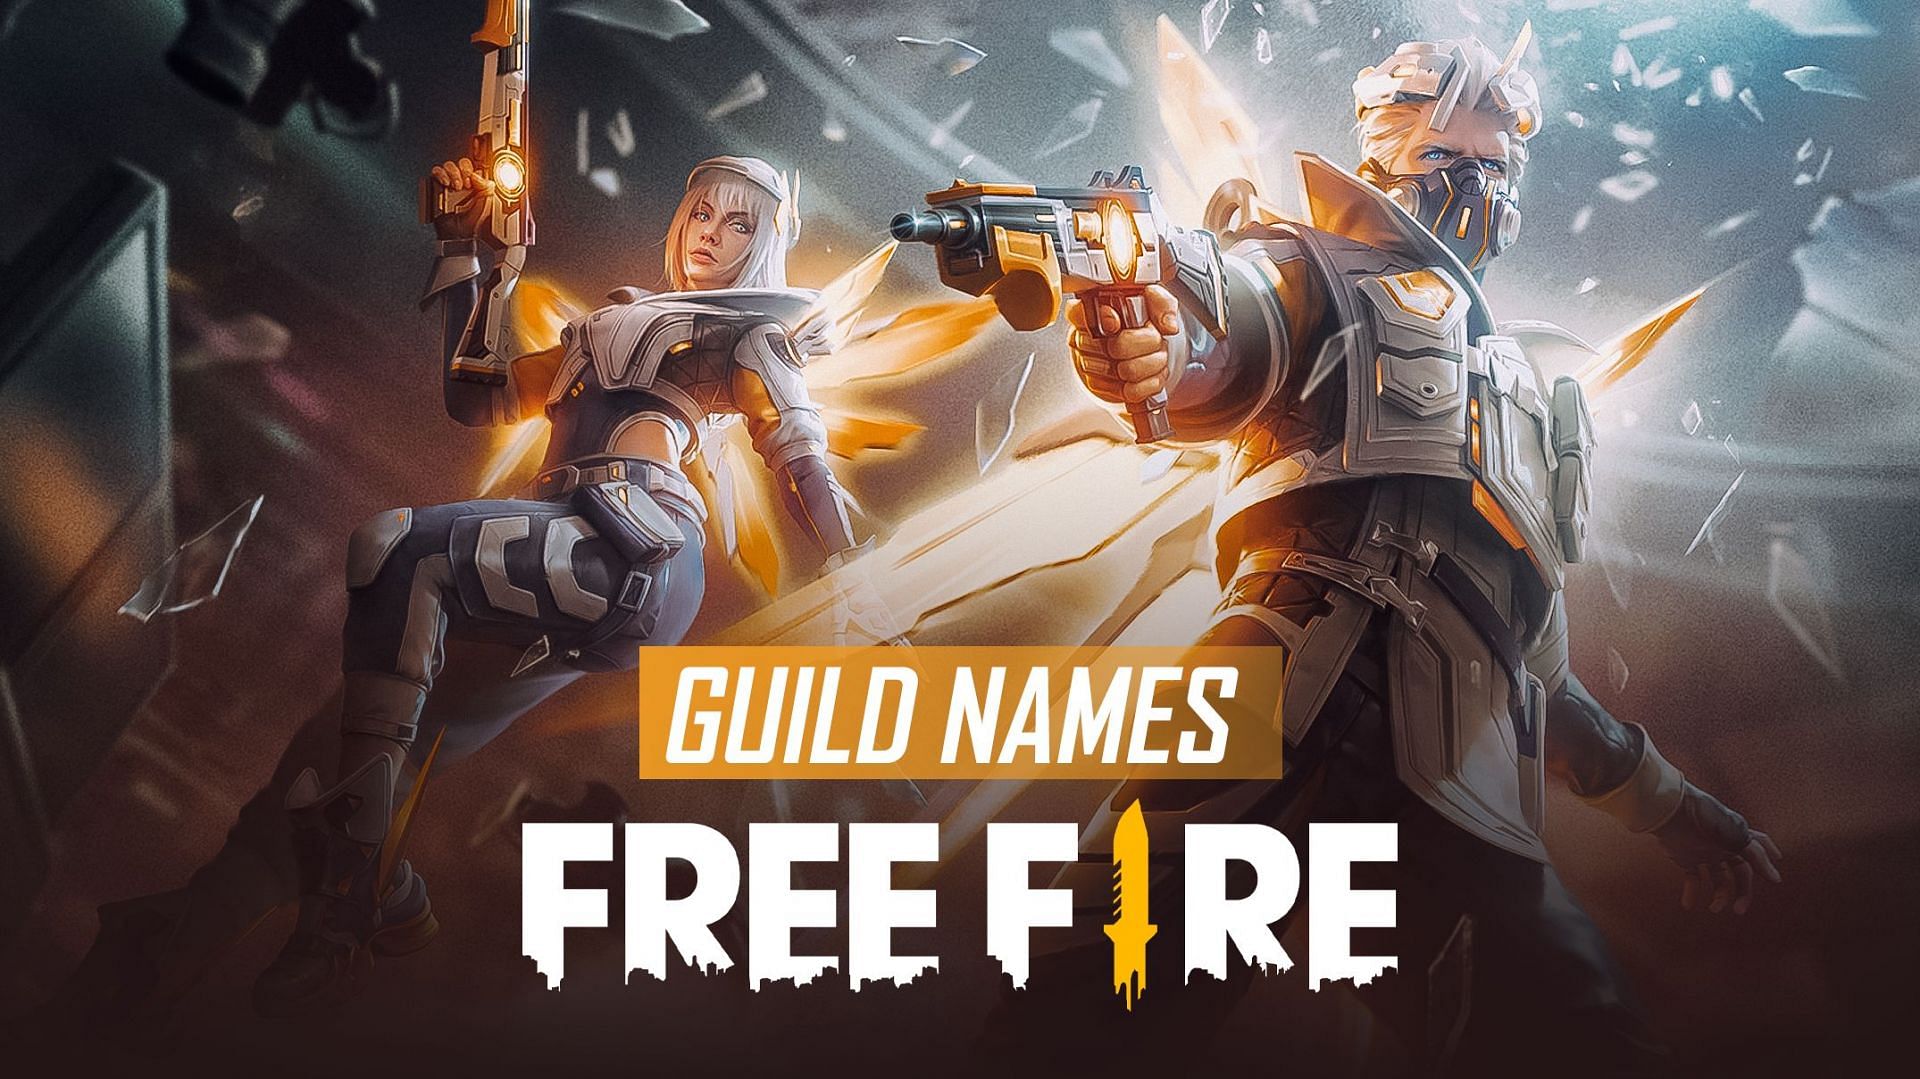 Many users look for stylish guild names (Image via Free Fire)